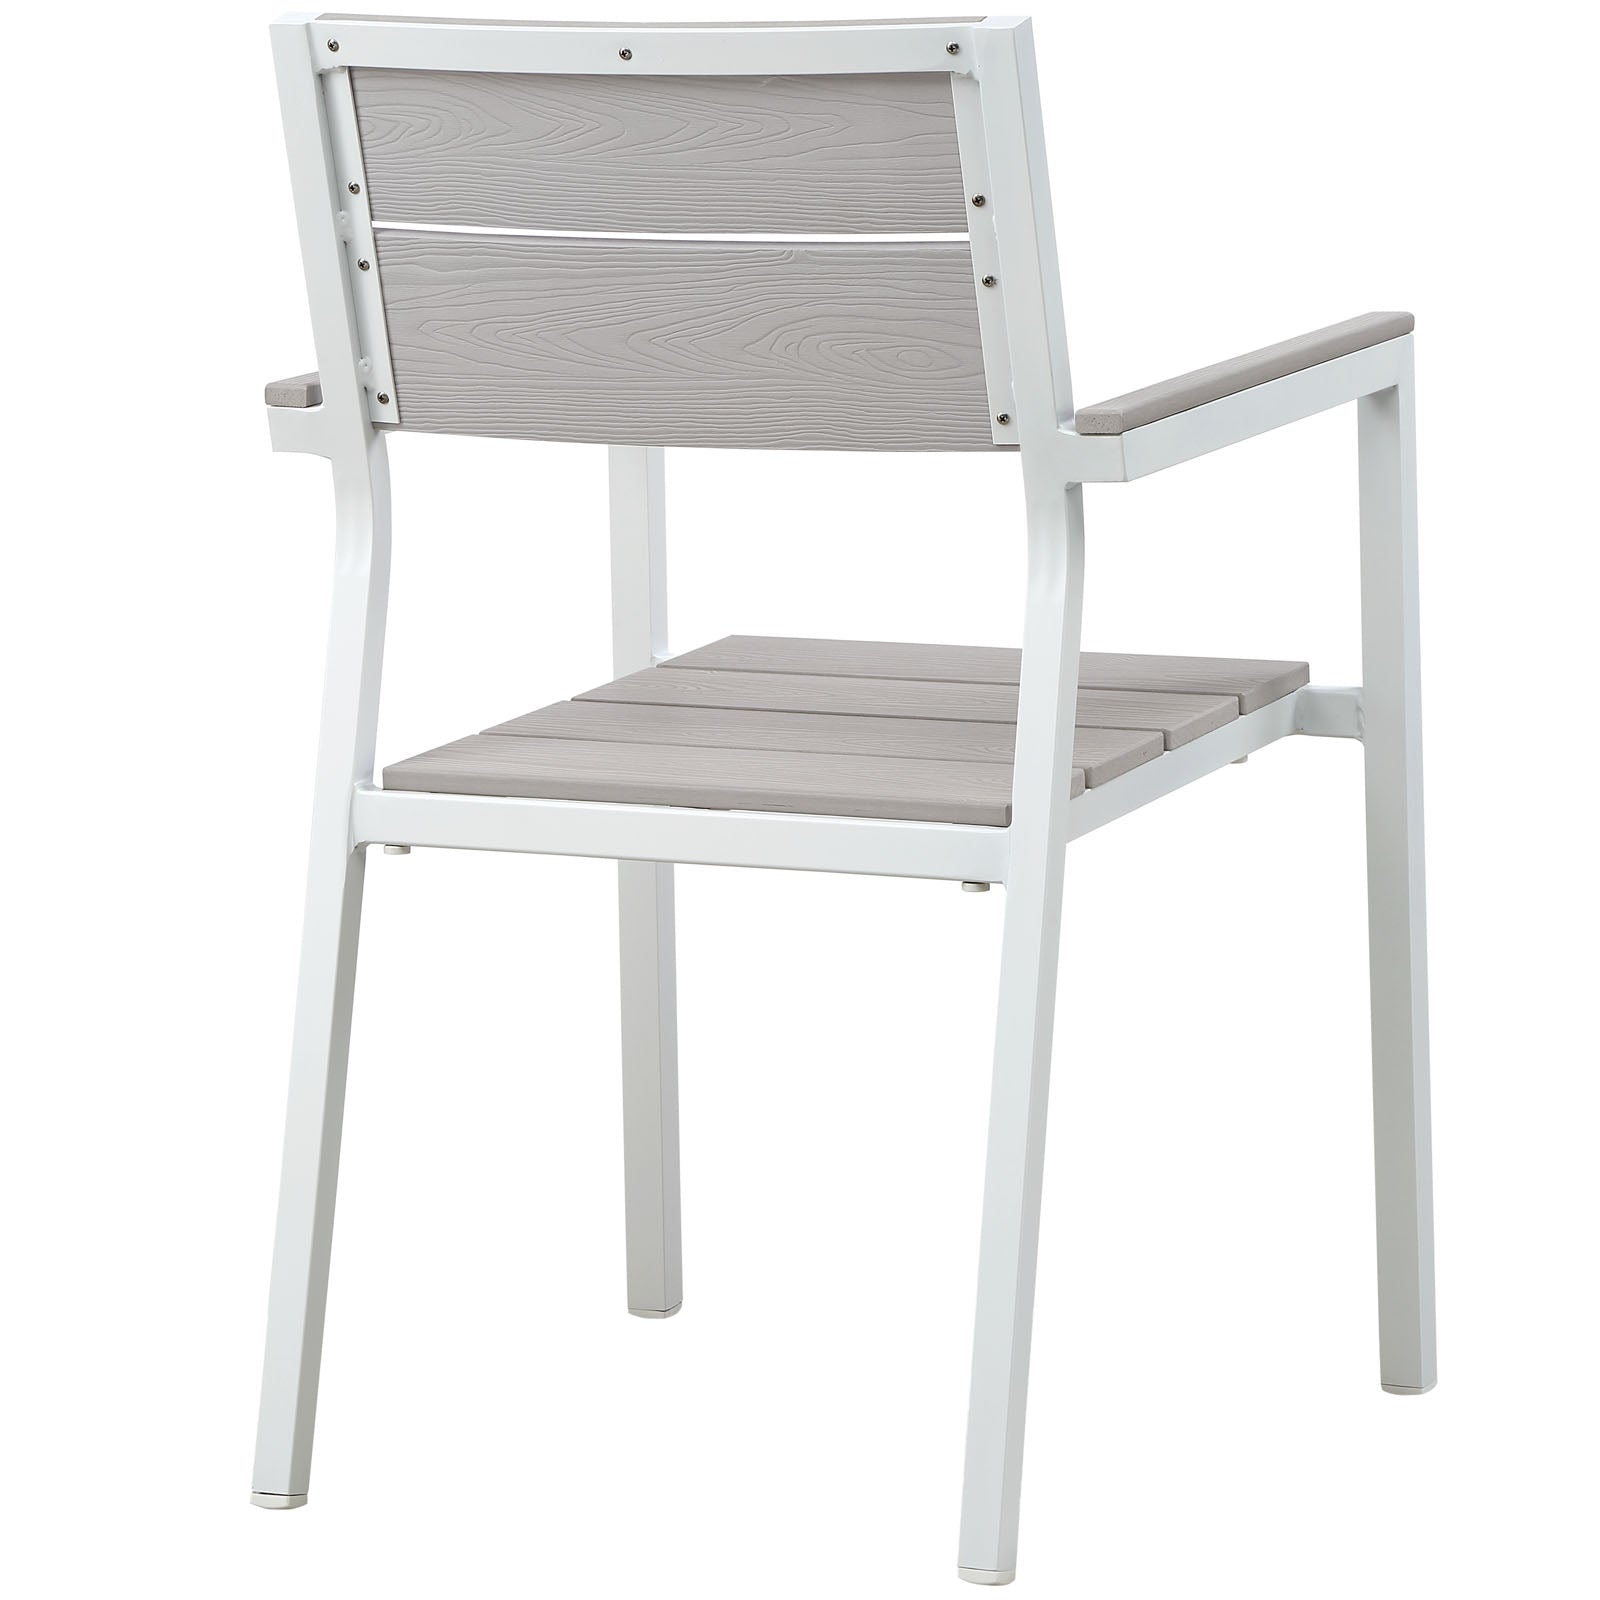 Modway Outdoor Dining Sets - Maine 63" Outdoor Dining Set For 4 White & Light Gray